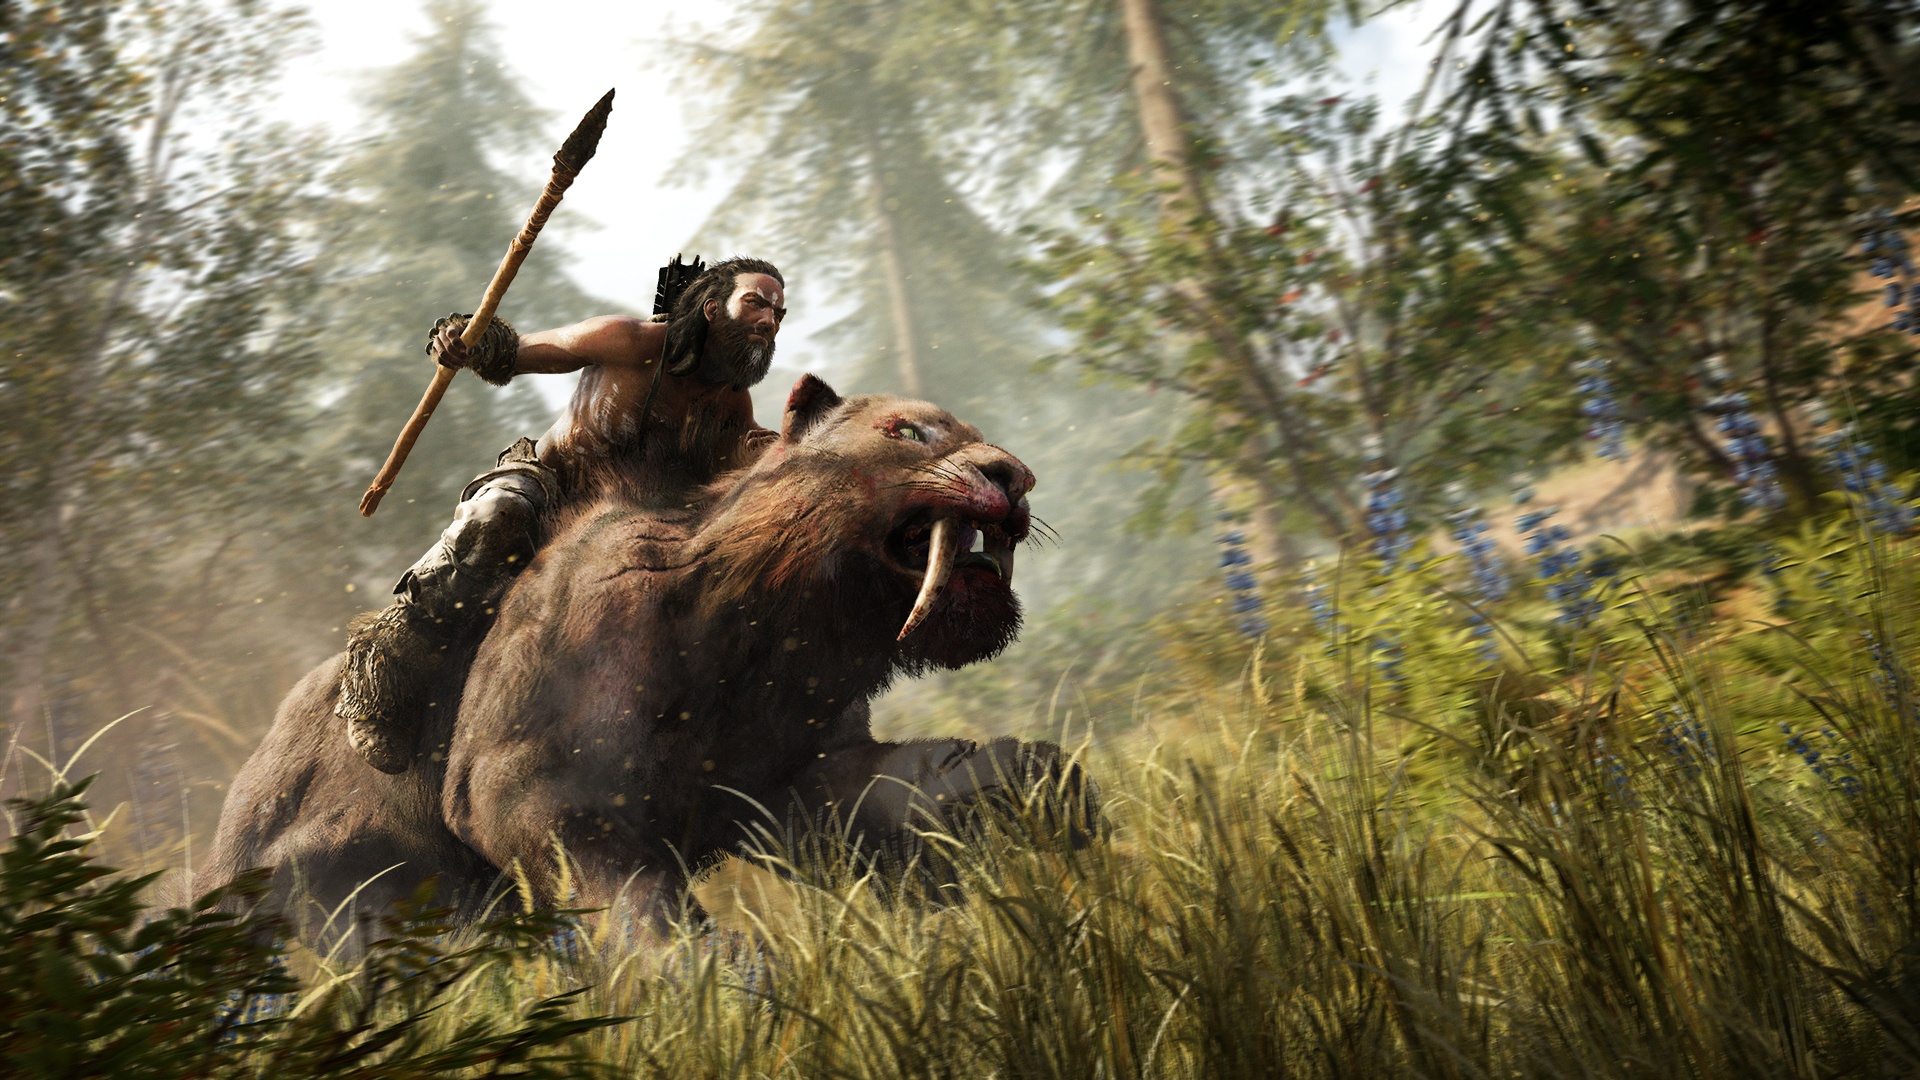 saber toothed tiger, video game, far cry primal, far cry 4K Ultra